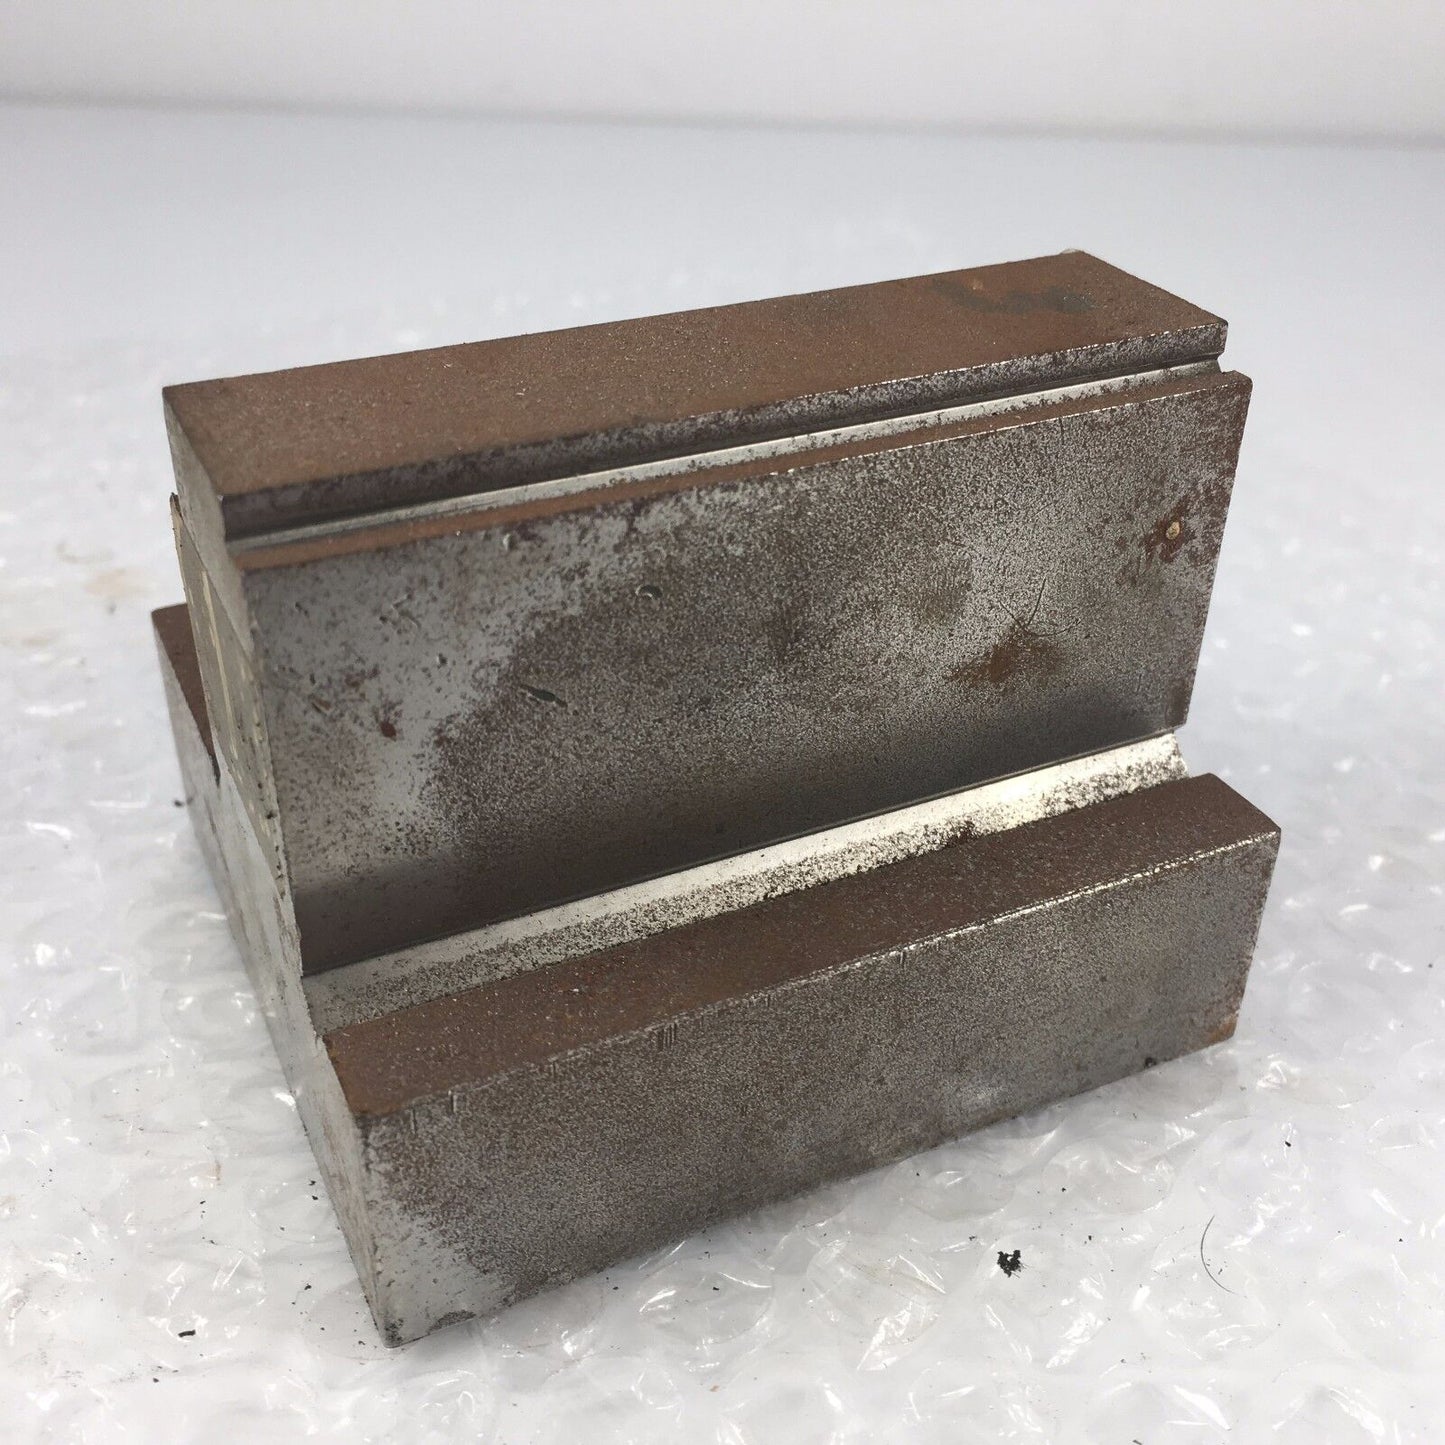 ANGLE PLATE FOR TOOL MAKER, MOLD MAKER, INSPECTOR, MACHINIST WITH STEPS